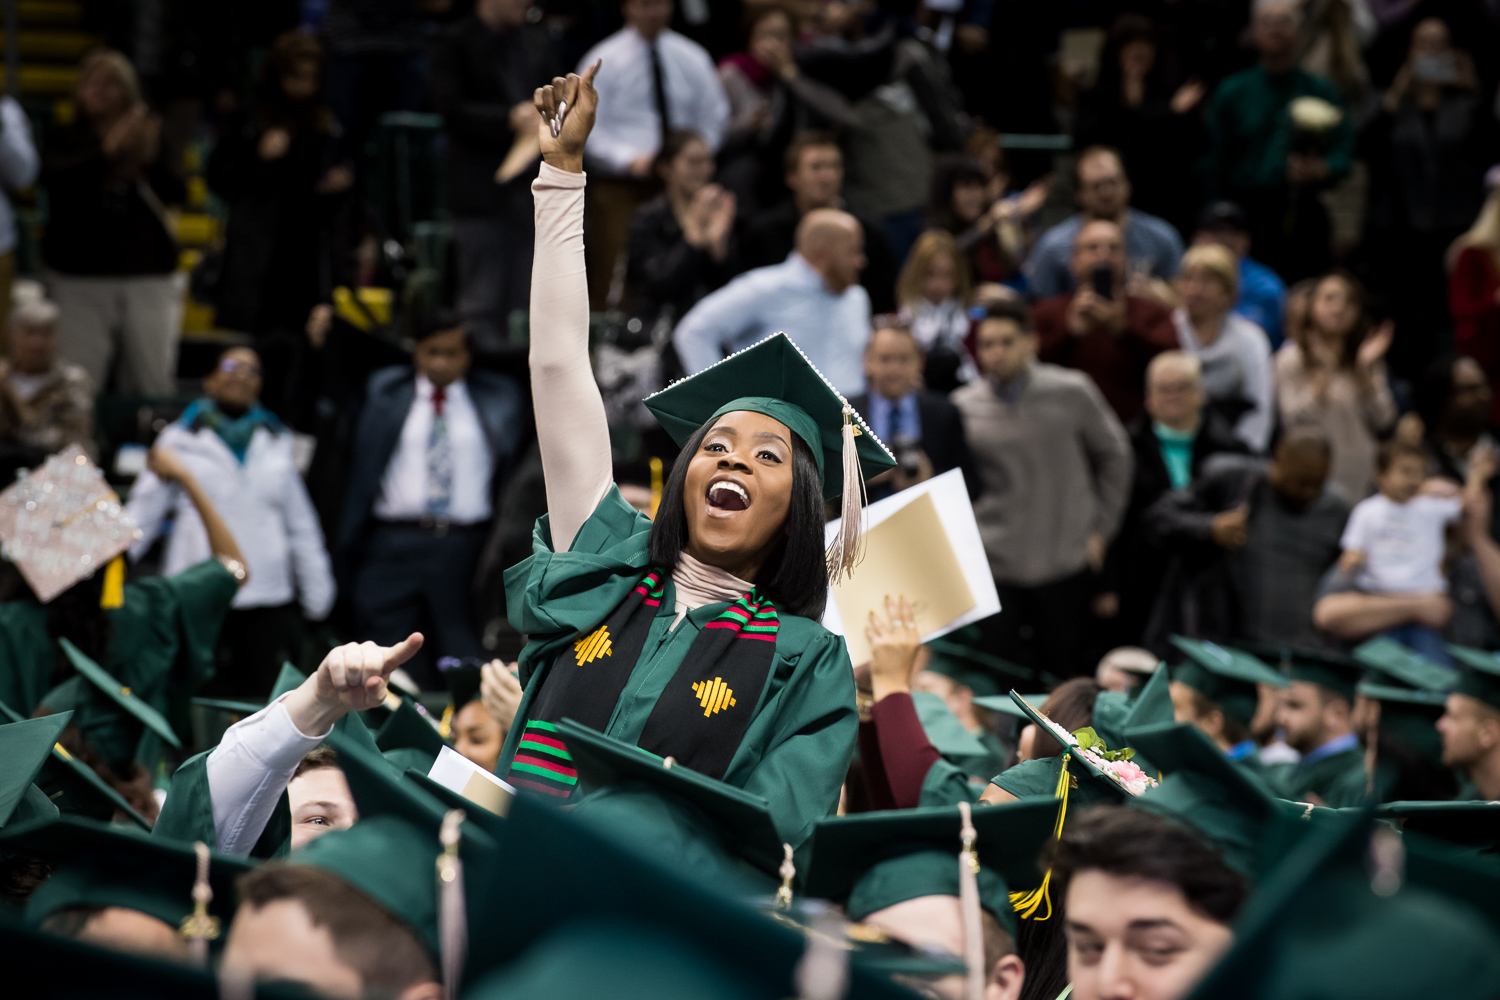 Wright State Newsroom Fall 2016 commencement in photos « Wright State